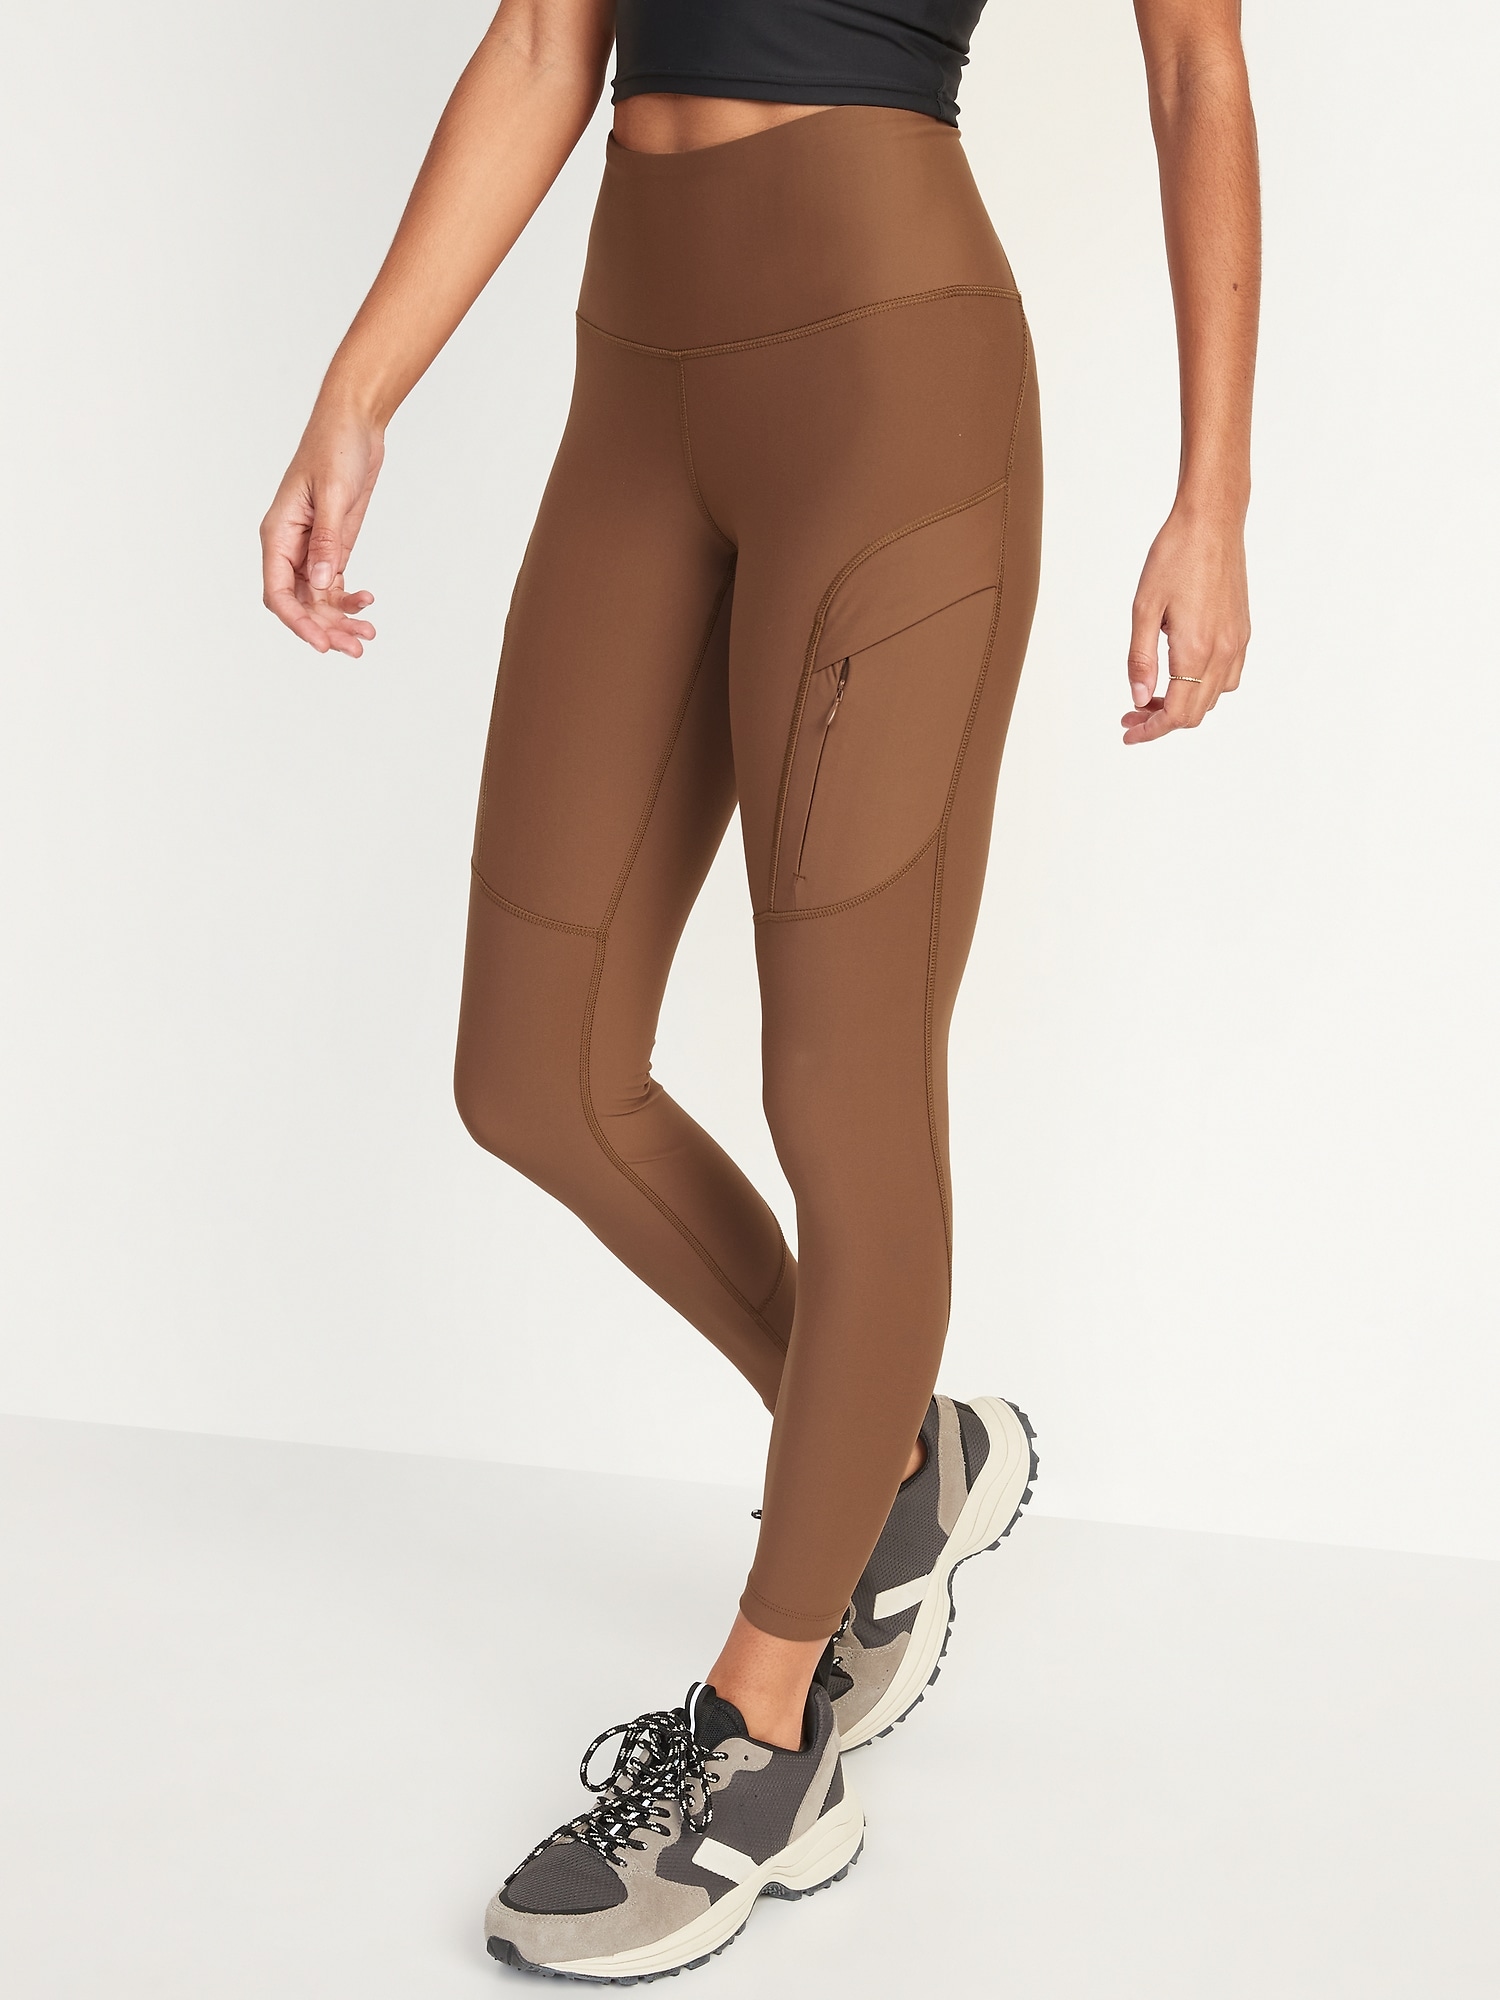 High-Waisted Tactical Outdoor Fitness Leggings with Side Cargo